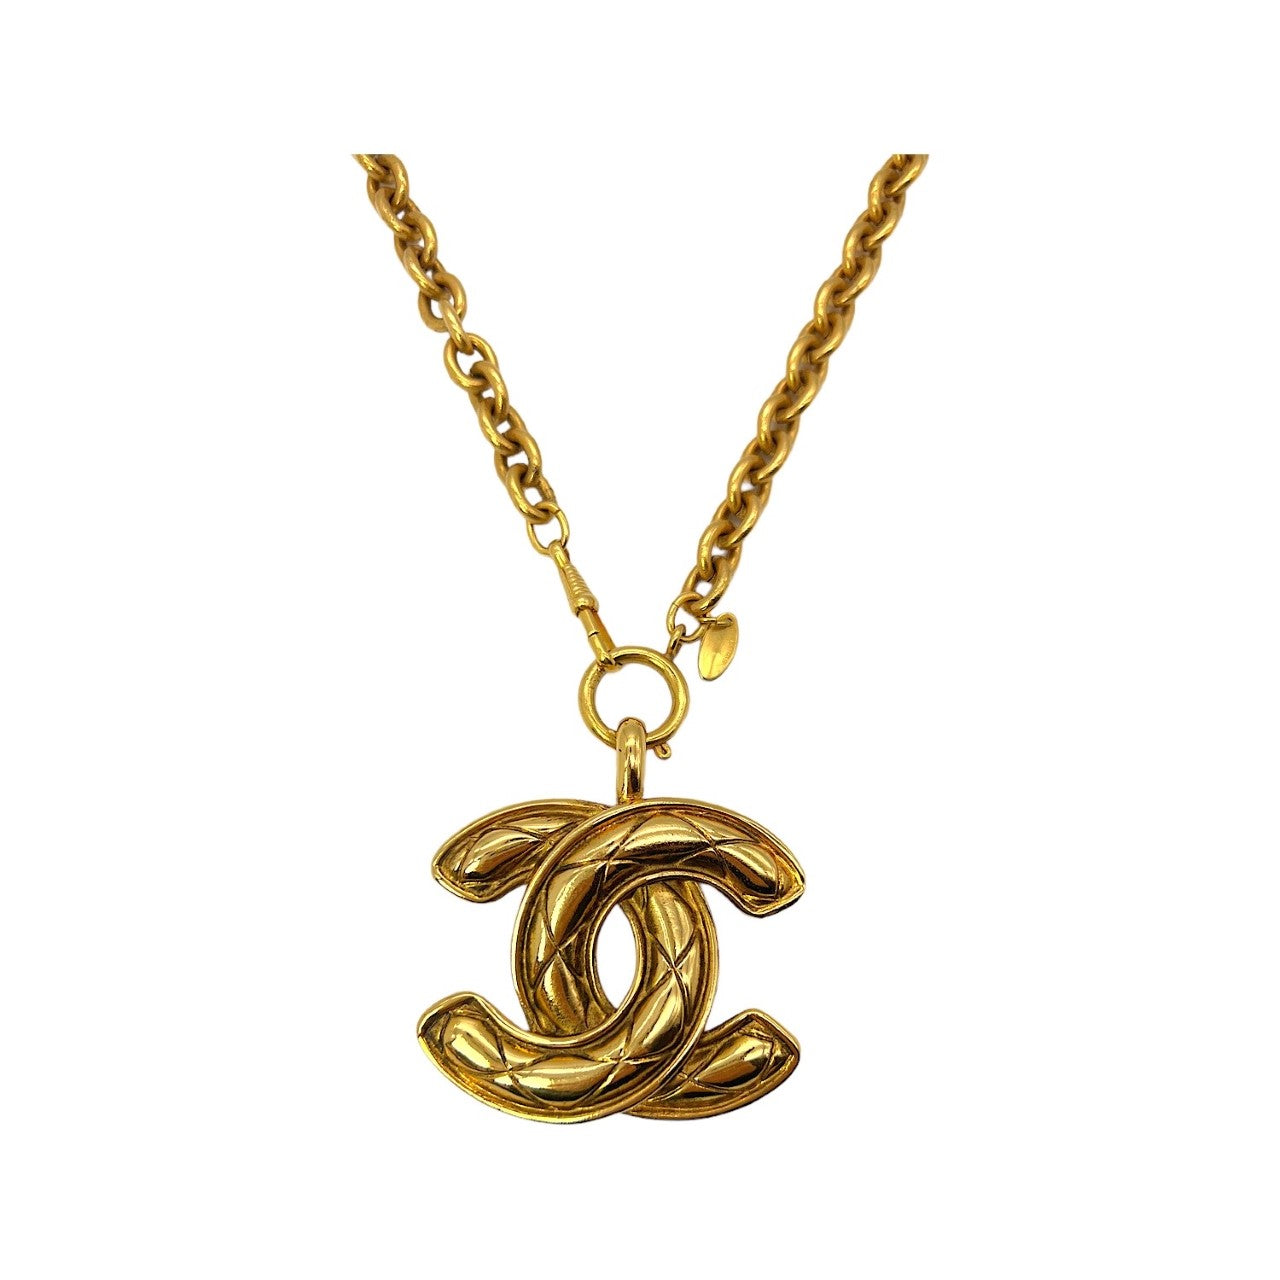 Chanel Gold, White Gold, Sapphire, Diamond Night and Day Necklace, Pendant, Contemporary Jewelry